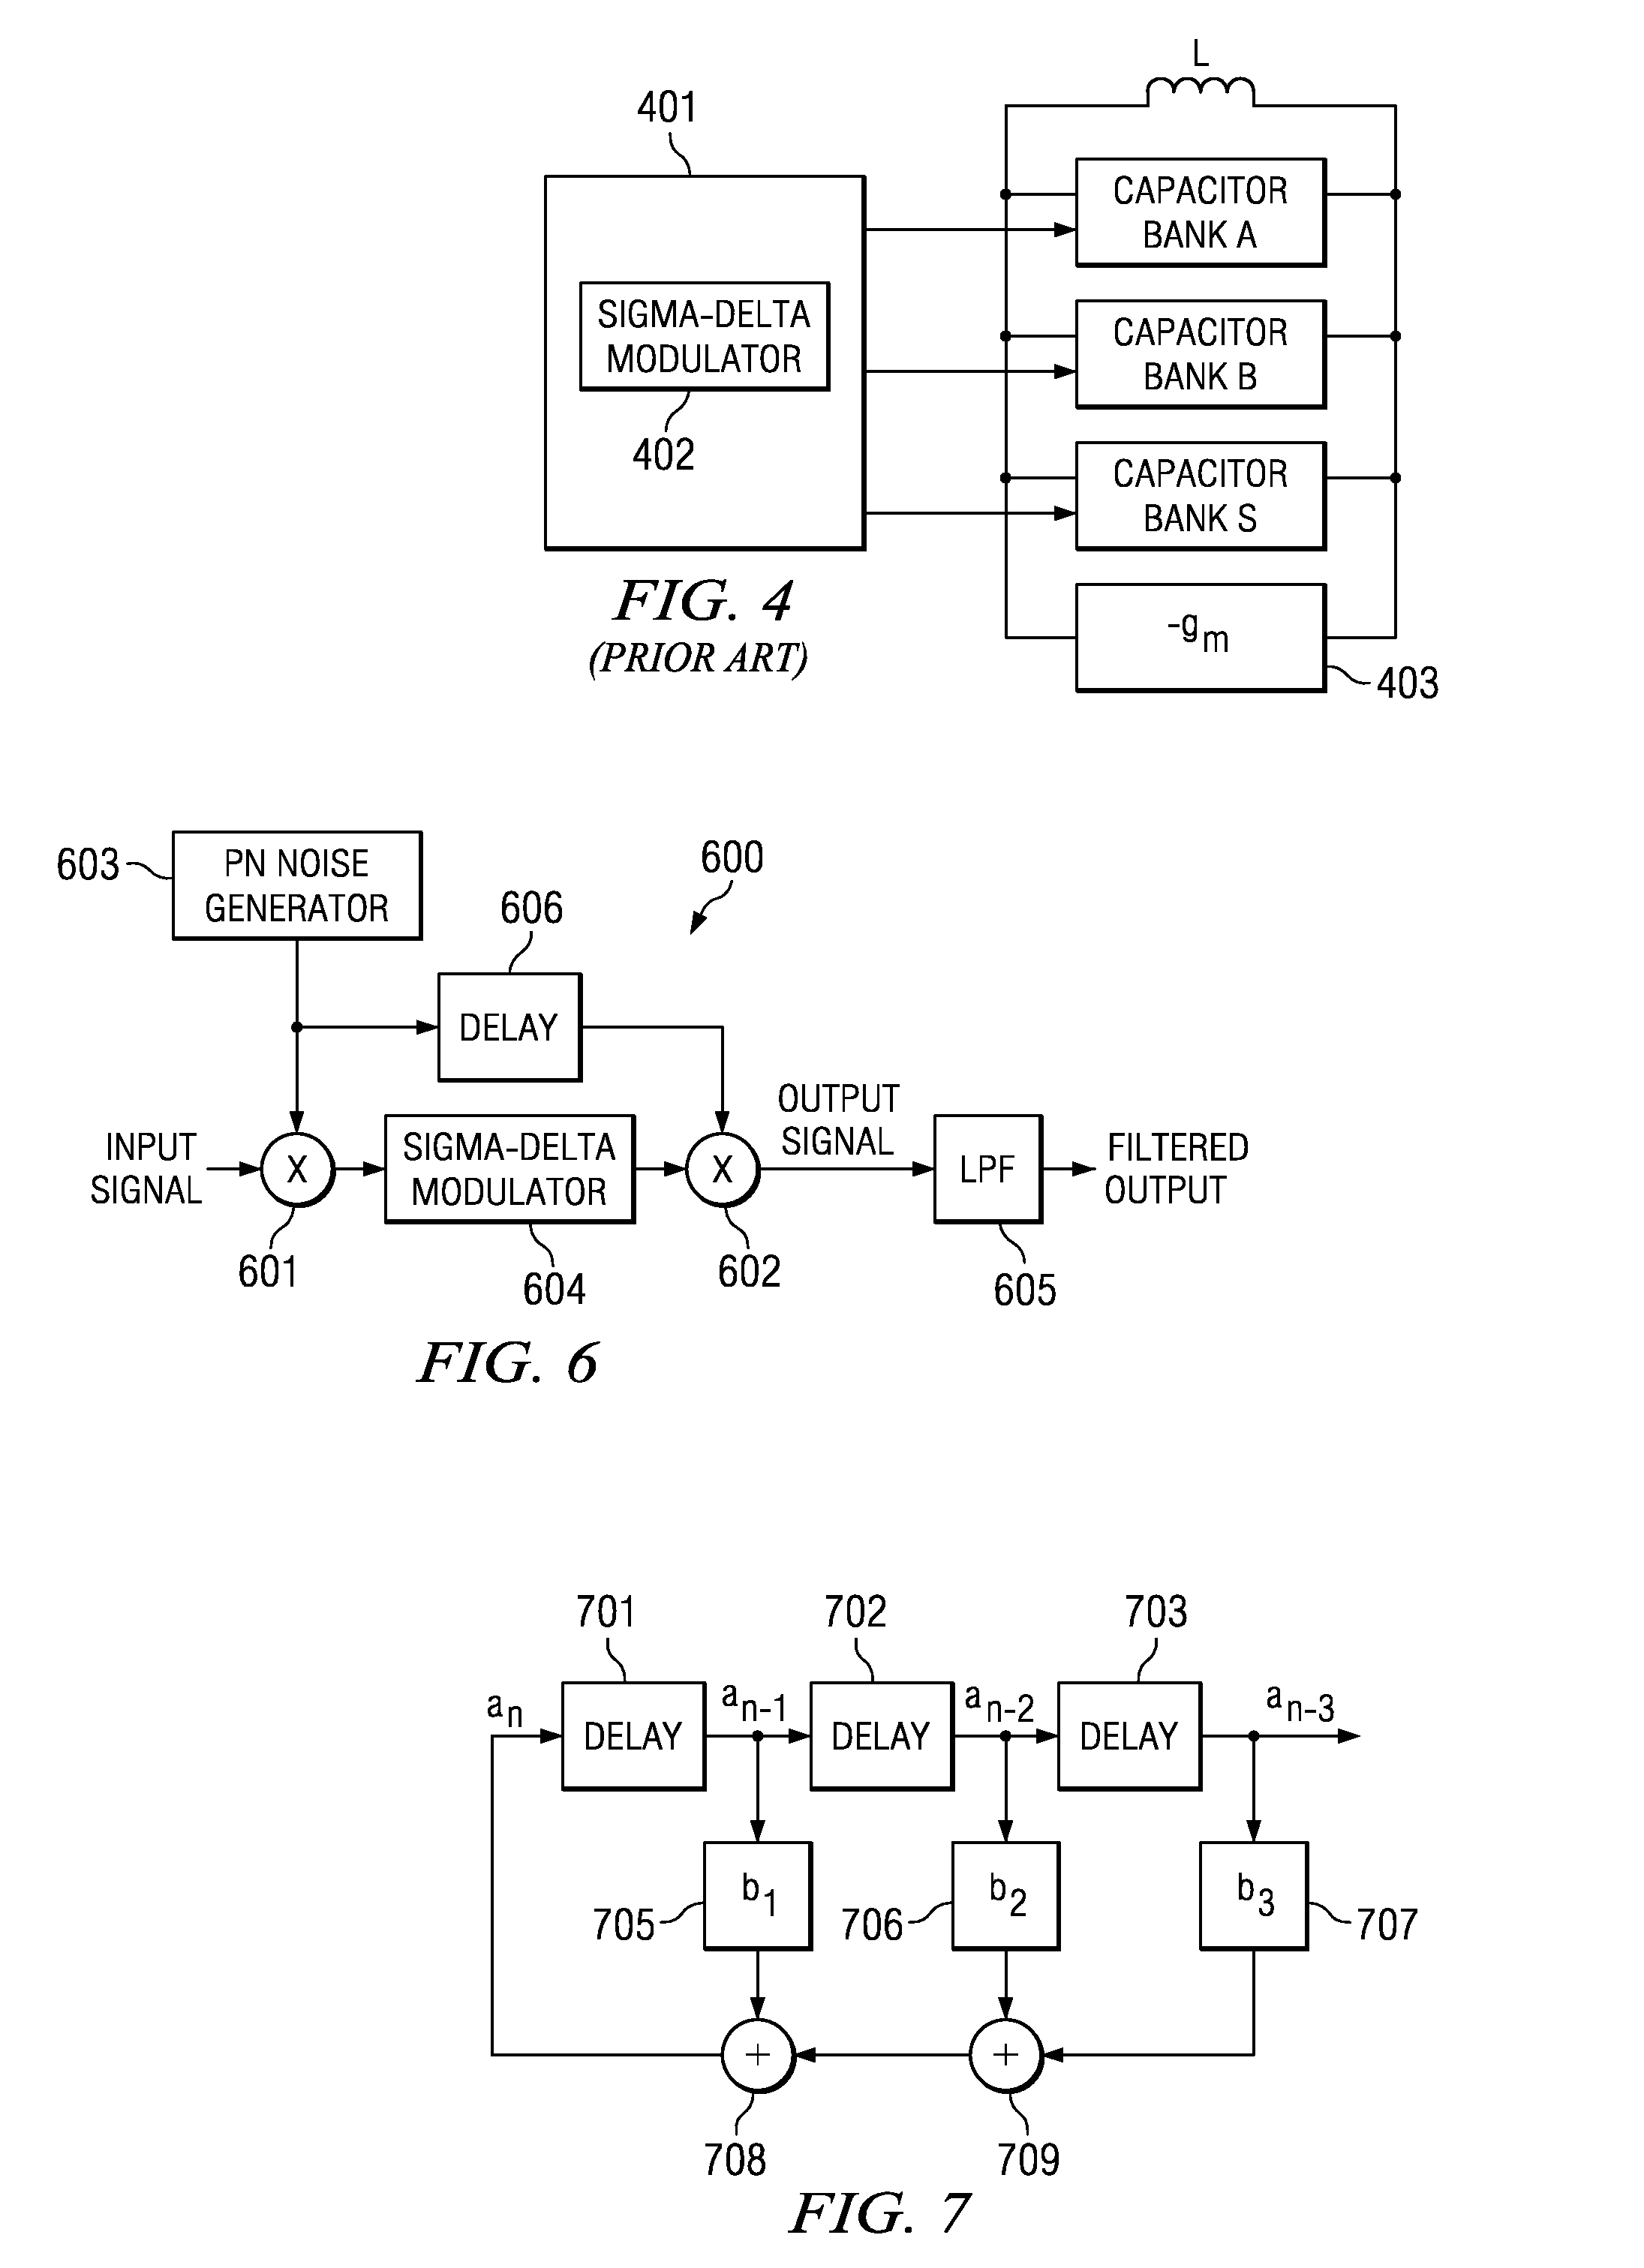 Apparatus and method for dithering a sigma-delta modulator